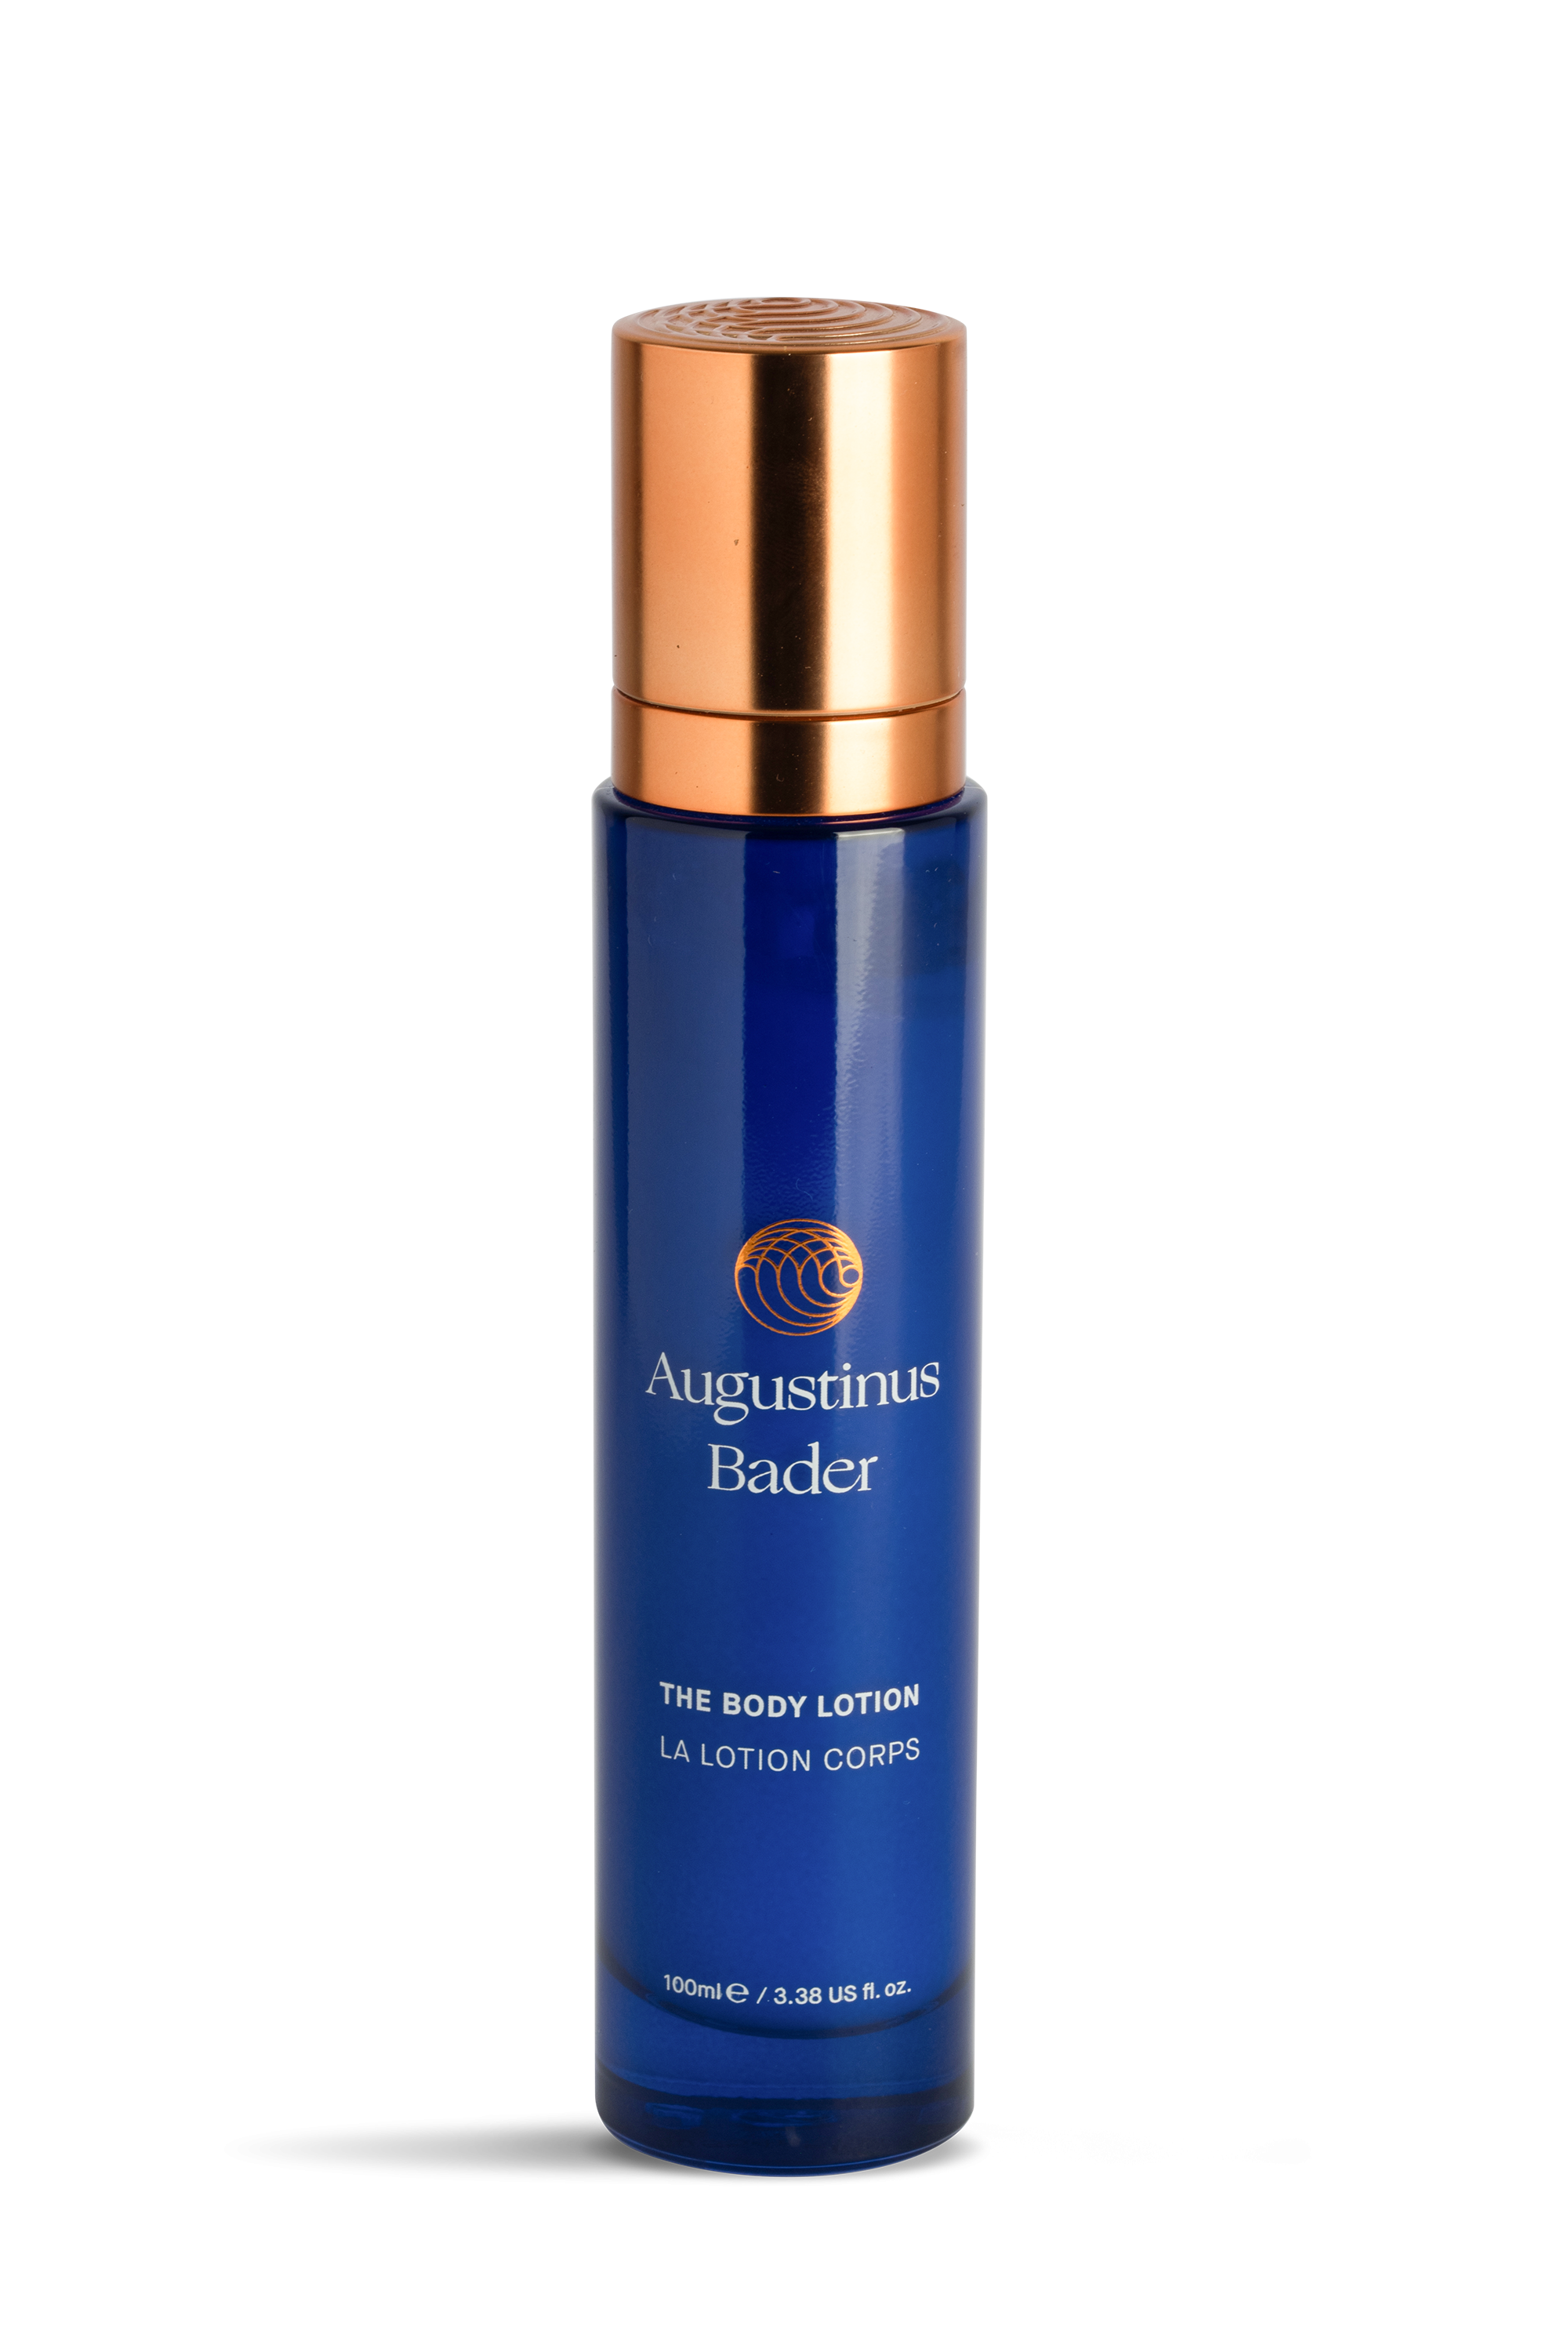 Augustinus bader the body lotion